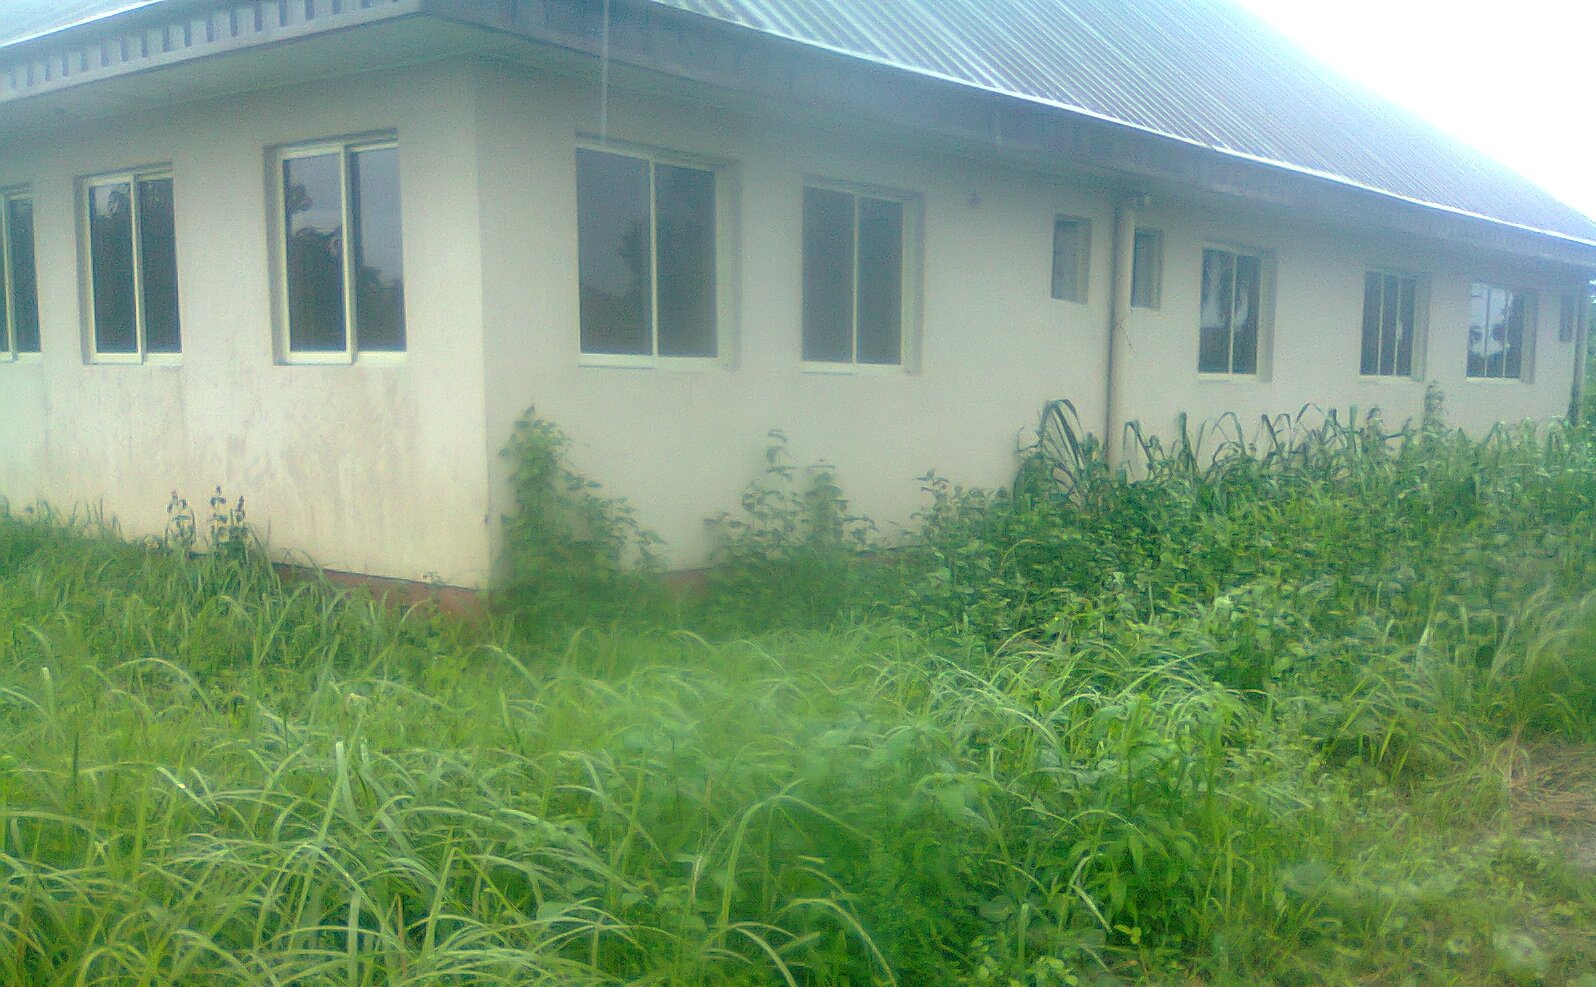 PHC building in Ughelli, Delta State overgrown with grass